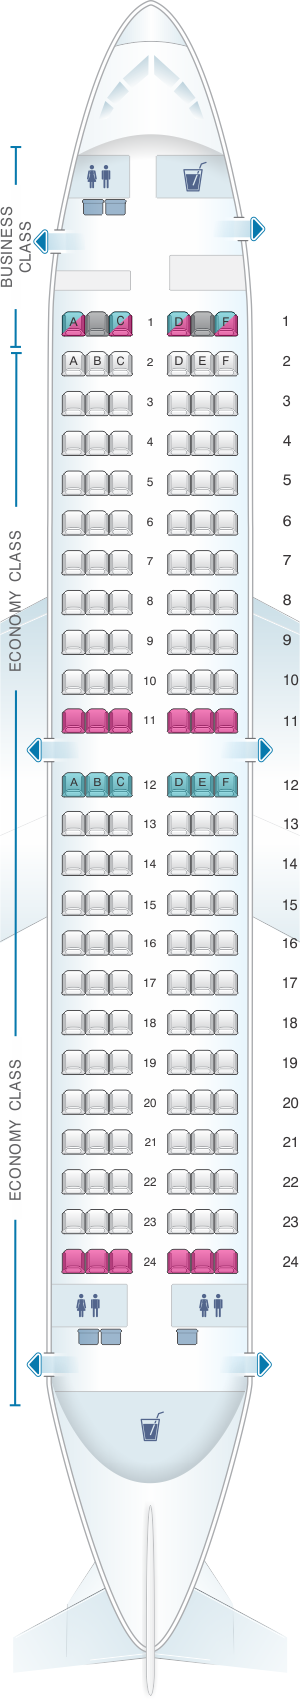 Seat map for airberlin Boeing B737 700